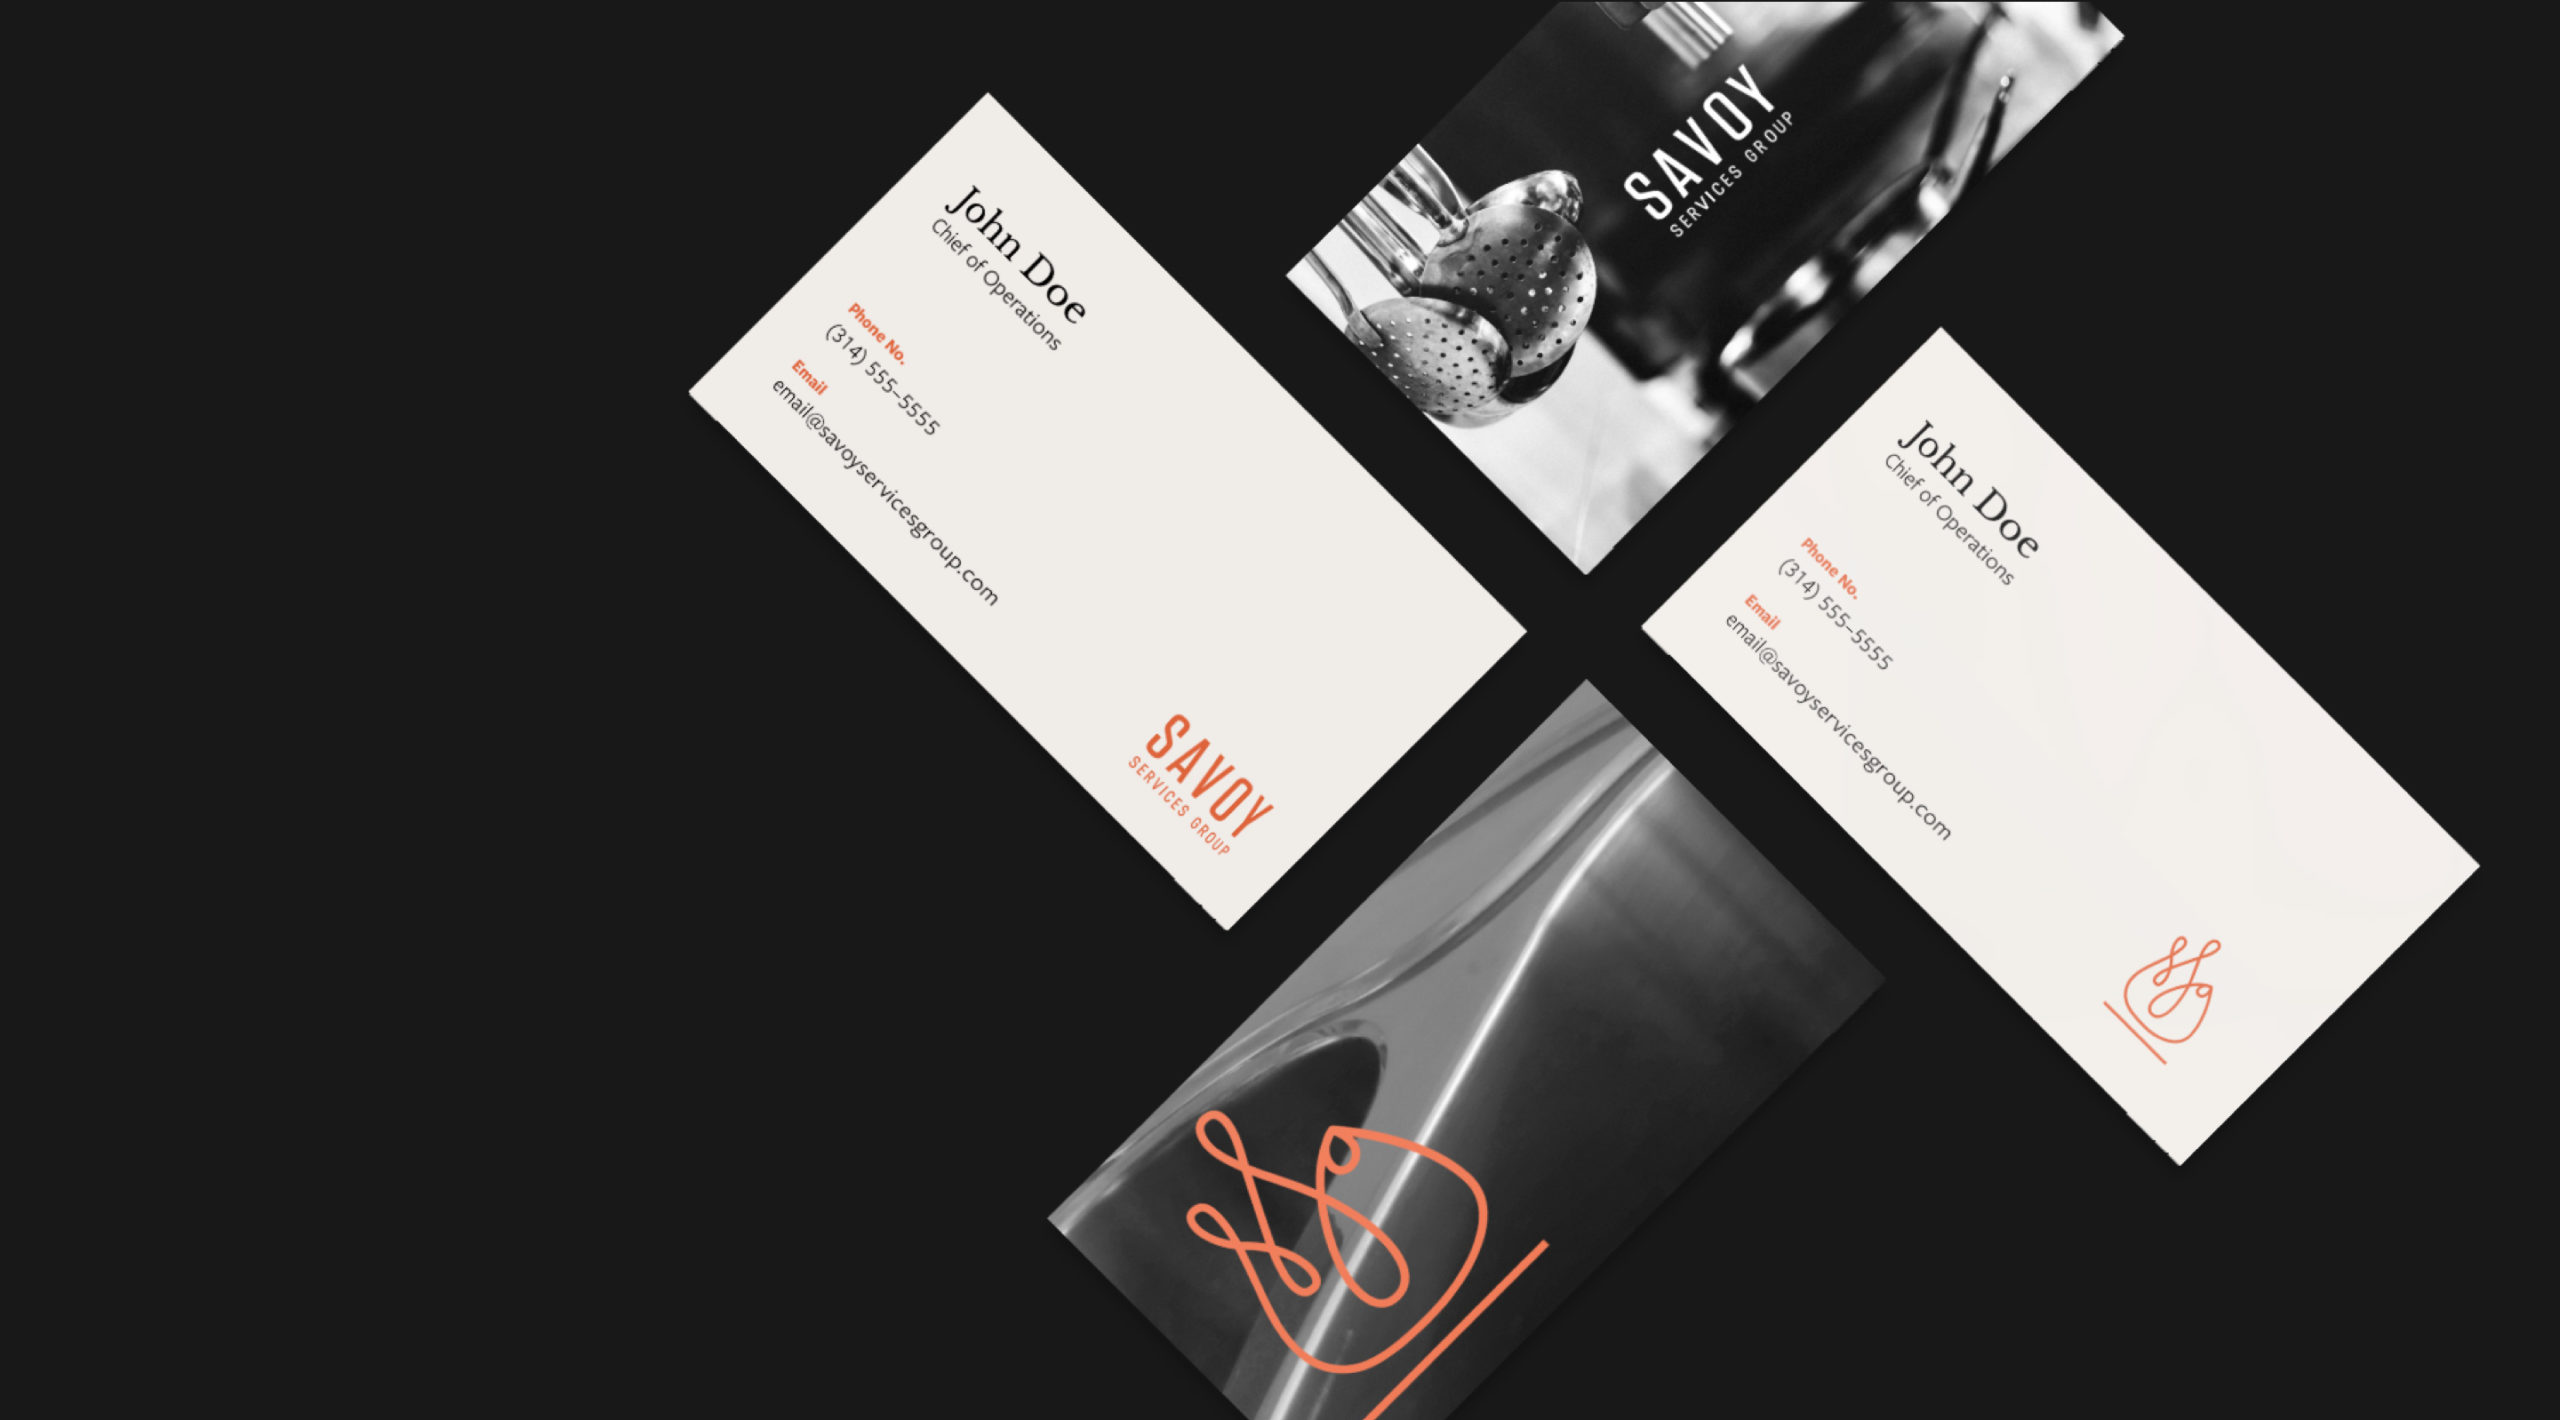 Business card mockups with Savoy's new branding